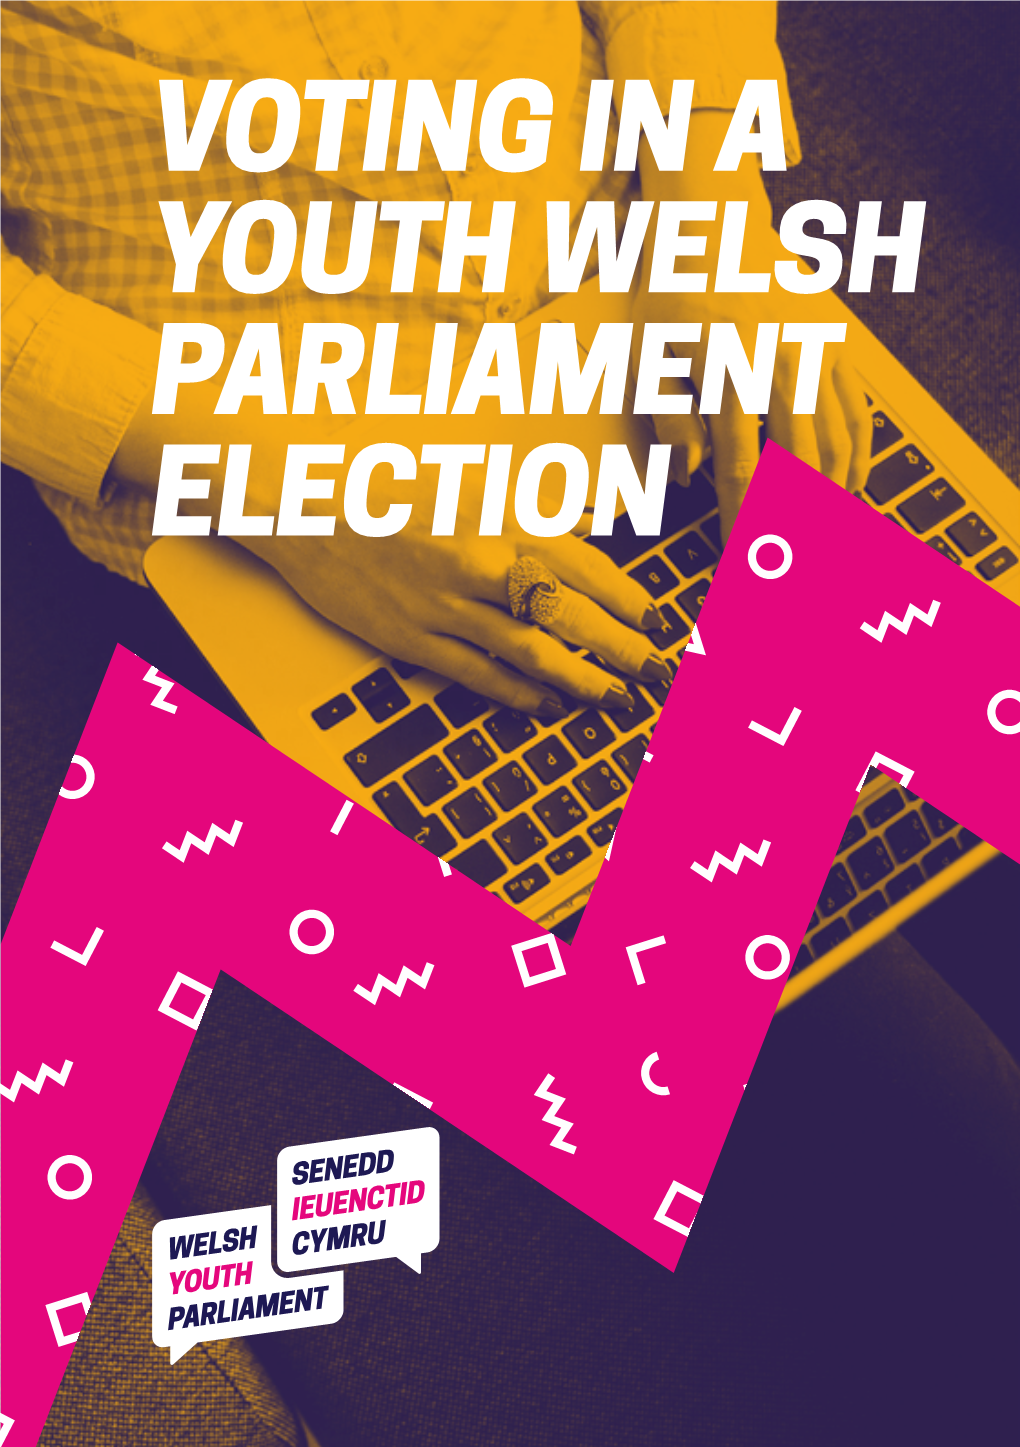 Voting in a Welsh Youth Parliament Election